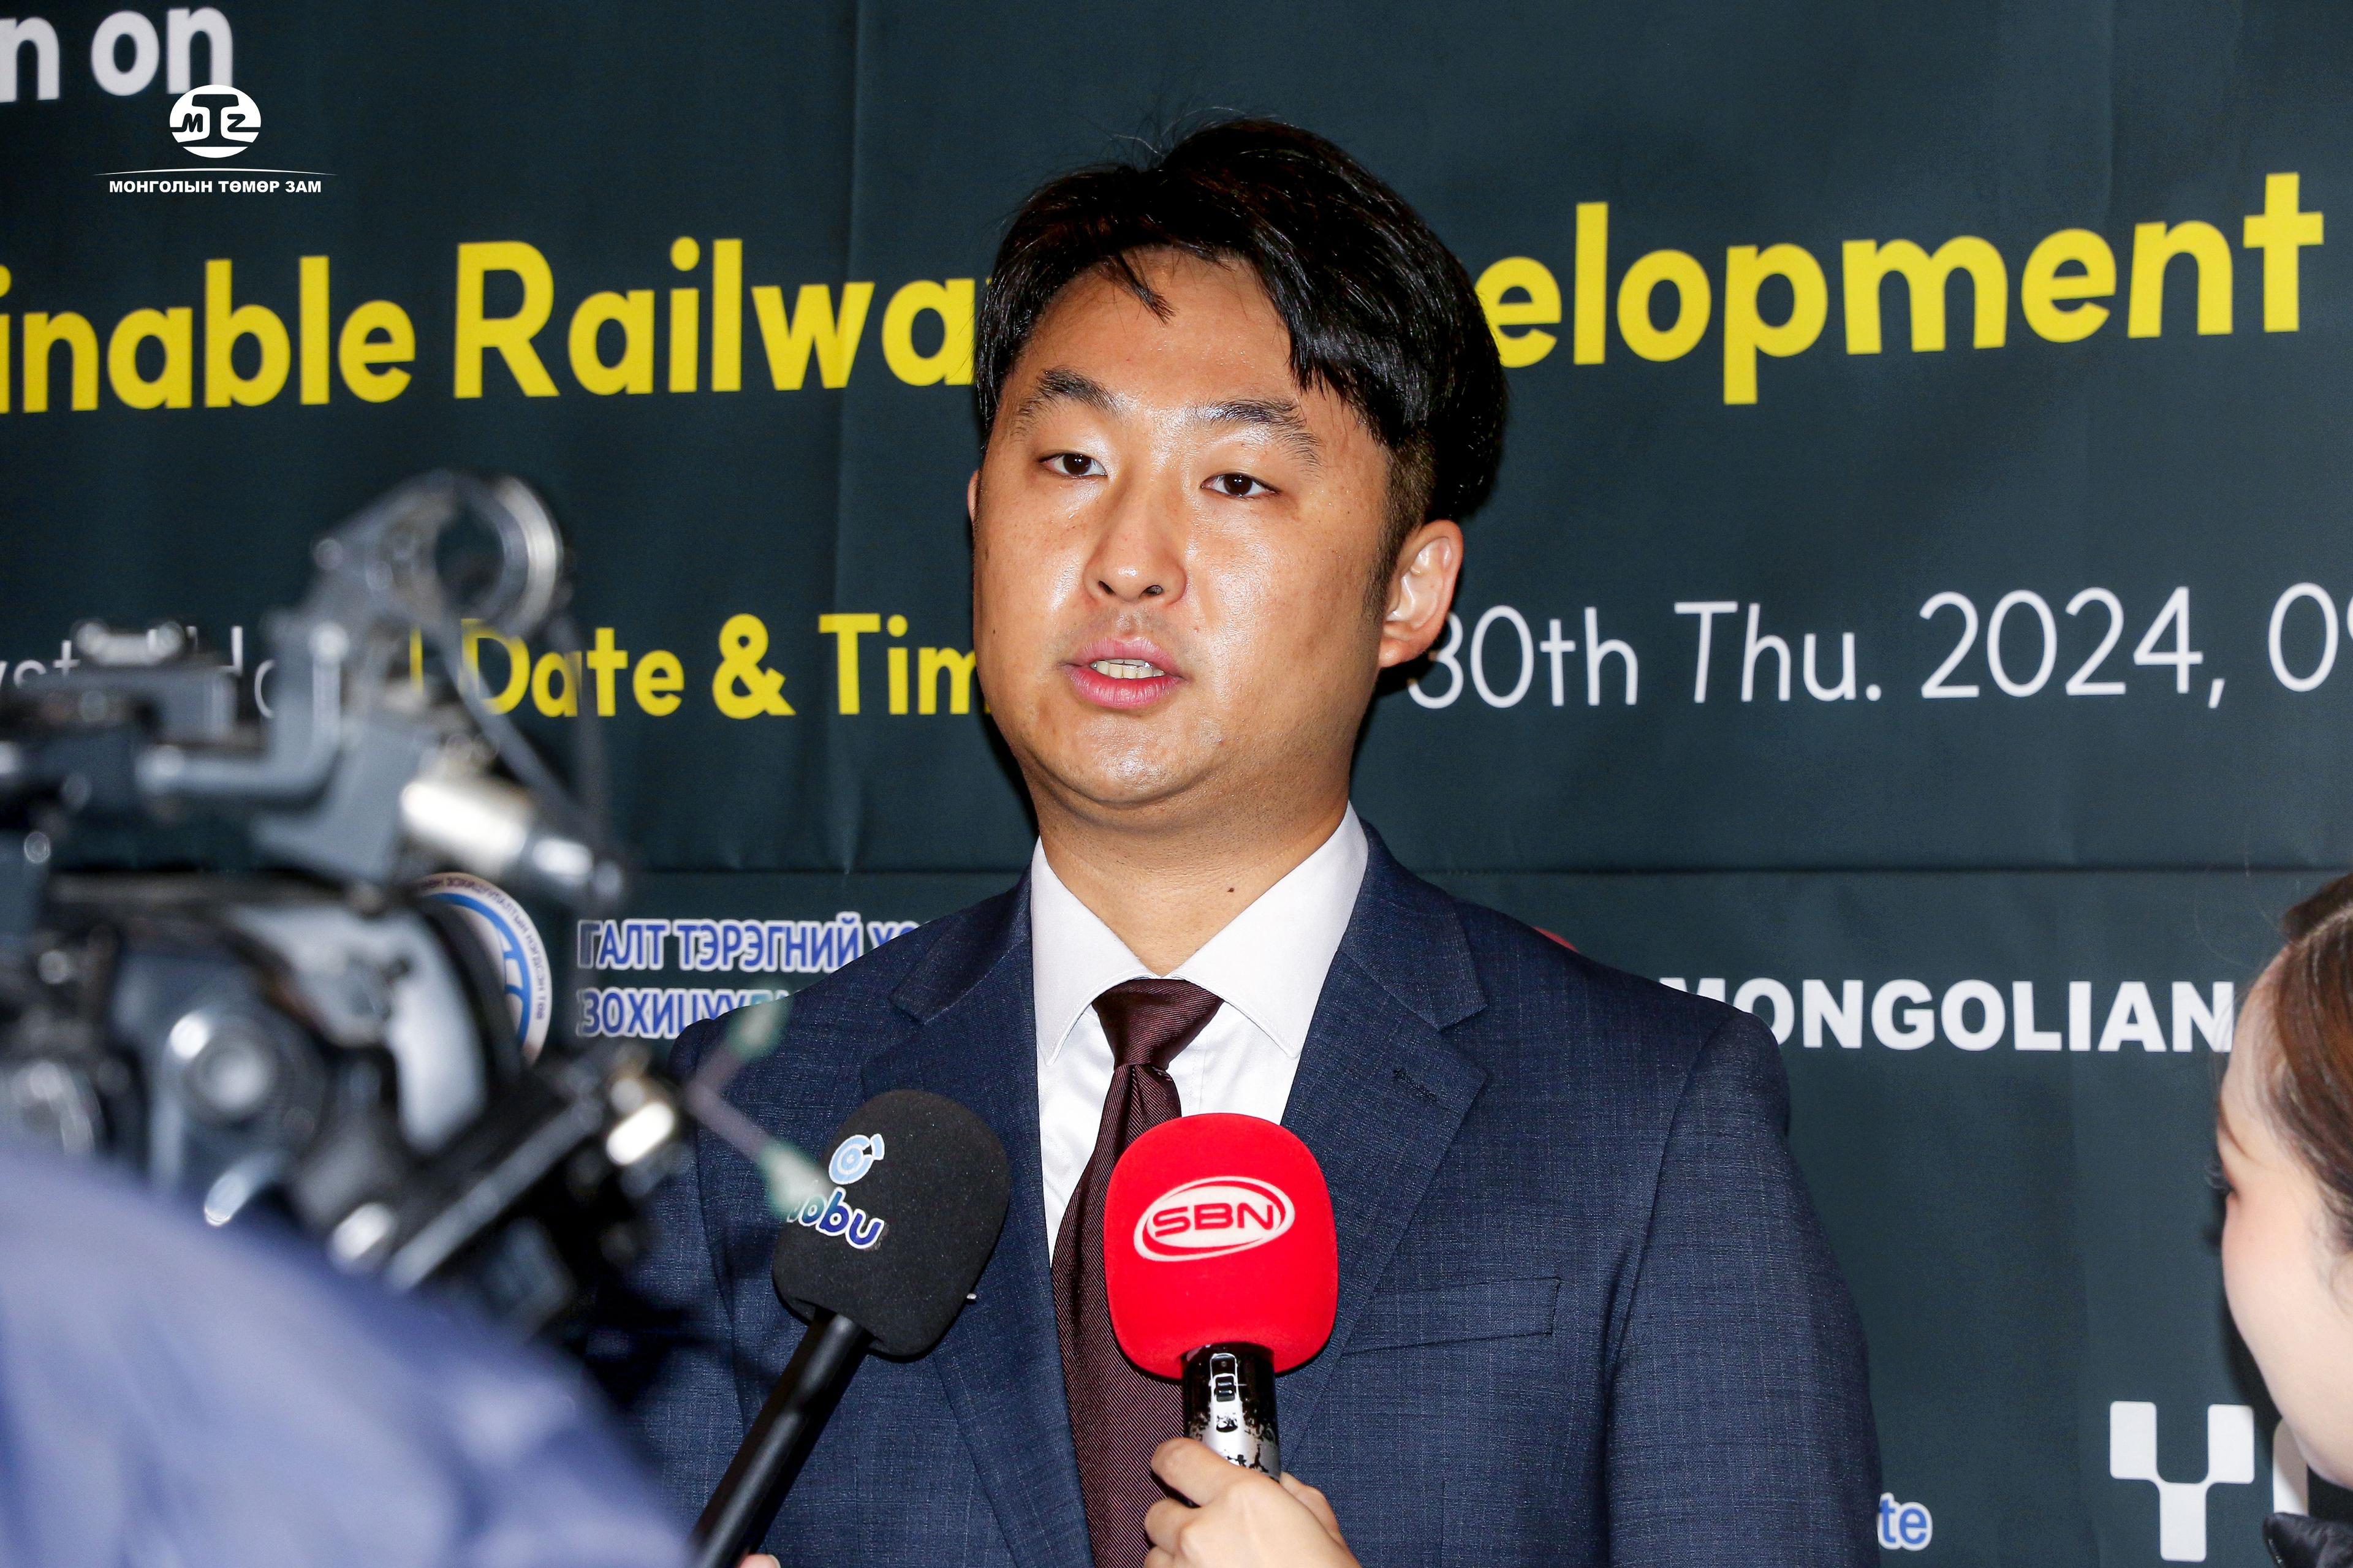 A JOINT SEMINAR TITLED "STRATEGIES FOR SUSTAINABLE RAILWAY DEVELOPMENT IN MONGOLIA" WAS ORGANIZED